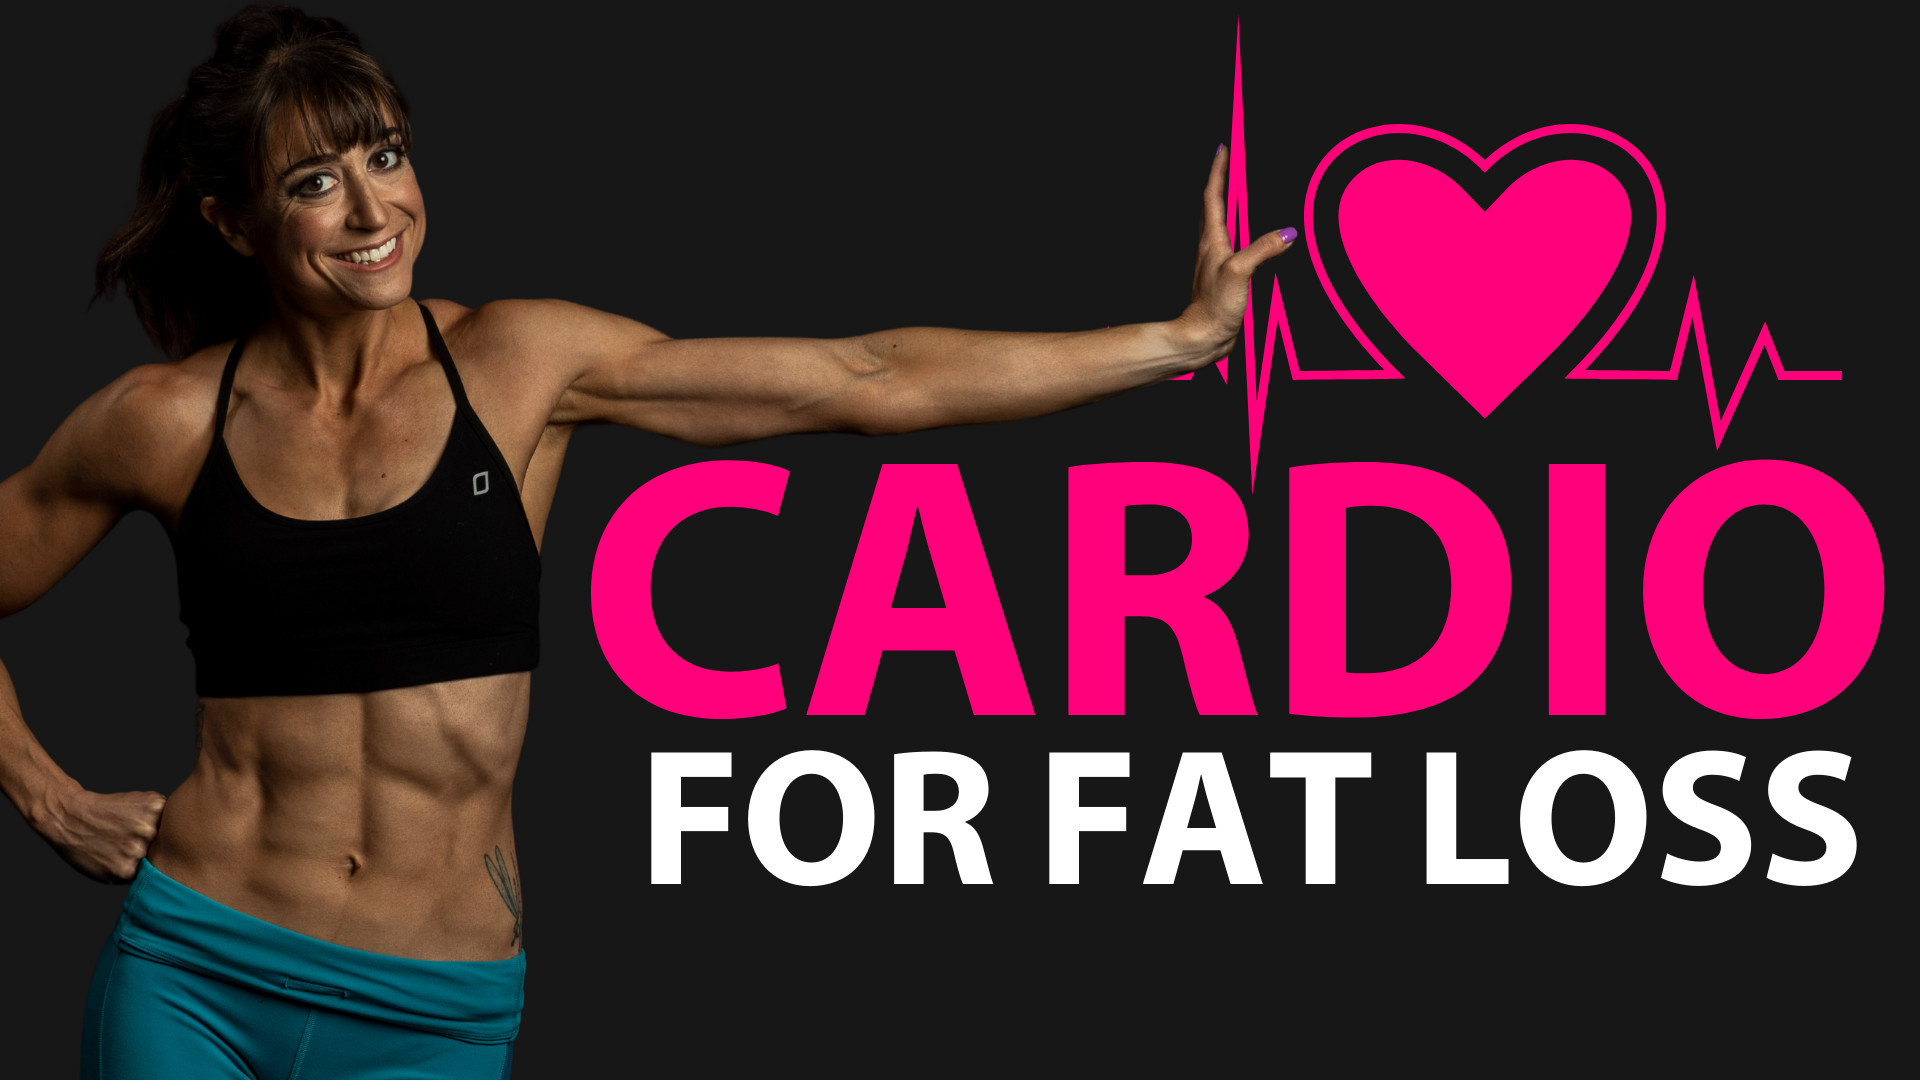 What Is The Best kind Of CARDIO For Fat Loss?